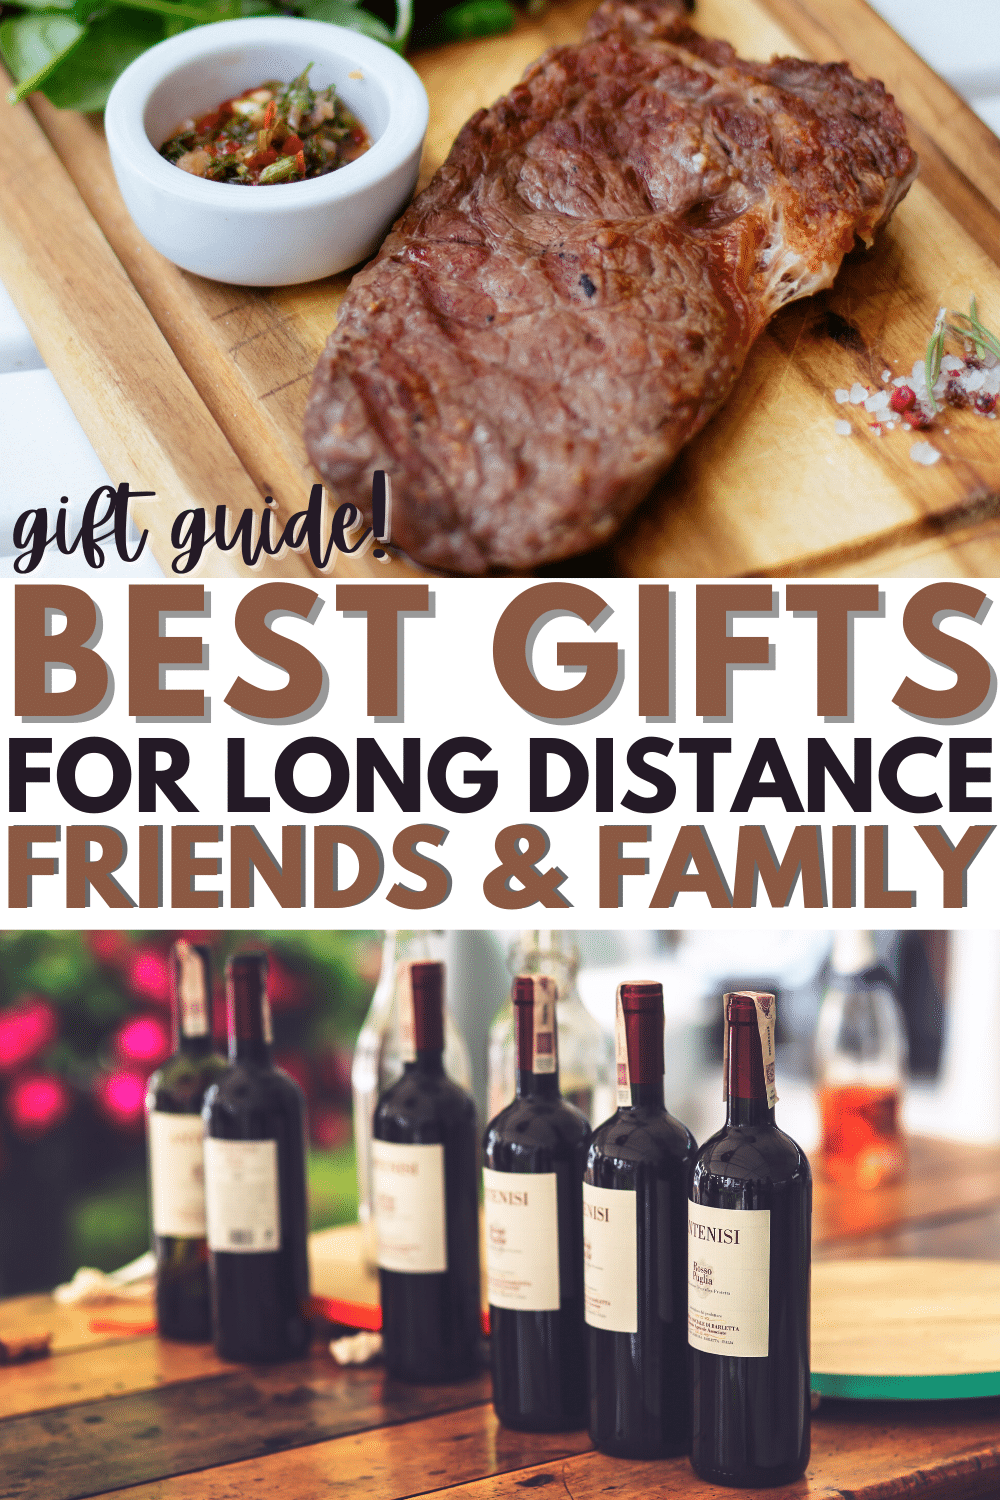 If you live far from friends or family & want to send a gift, the shipping costs are crazy! So, here's the best gifts for long-distance friends and family. #giftguide #giftideas #friends #family via @wondermomwannab